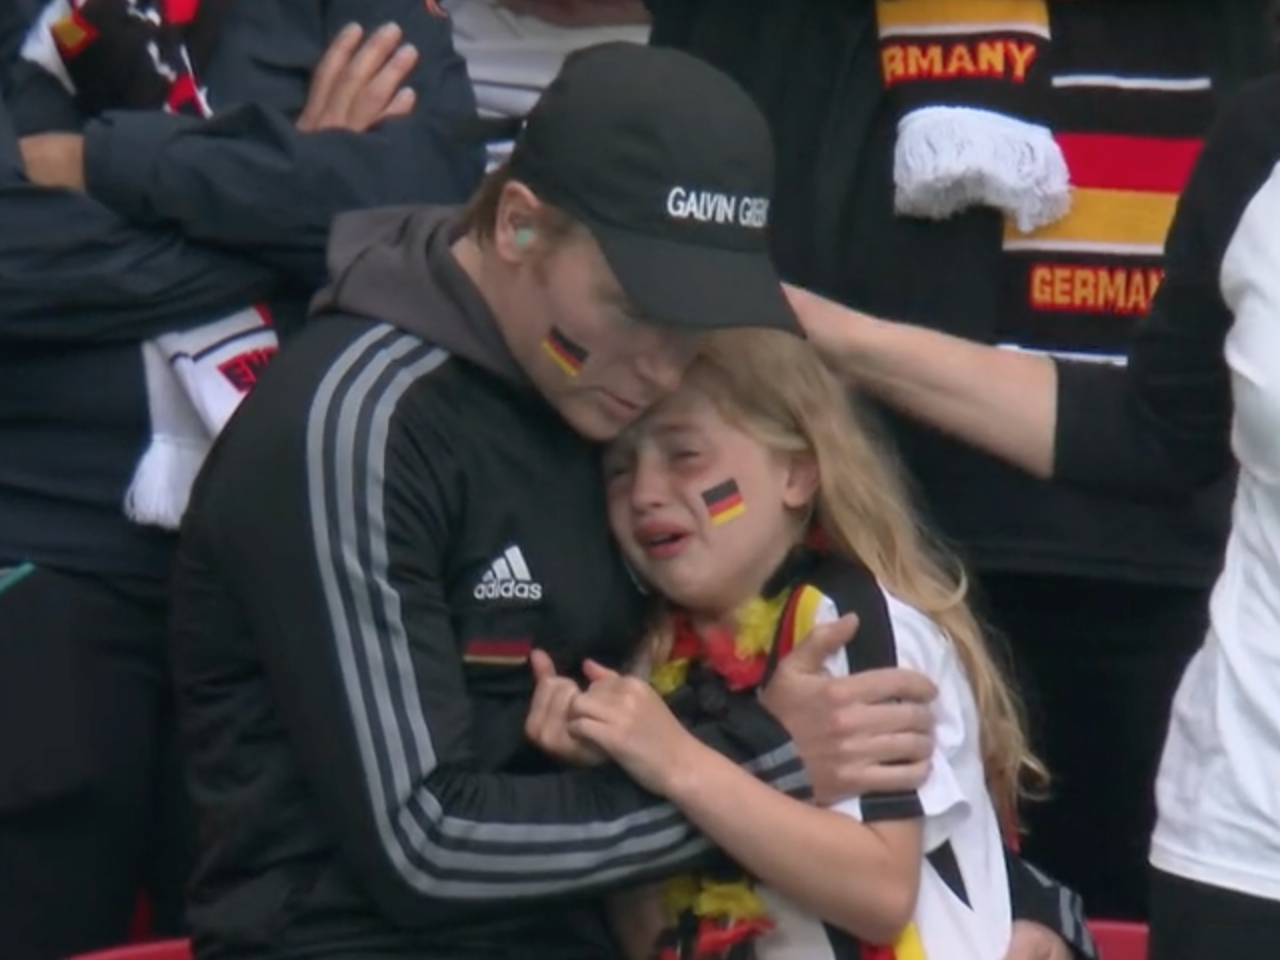 A young german fan cries as England beat Germany 2-0 during Euro 2020